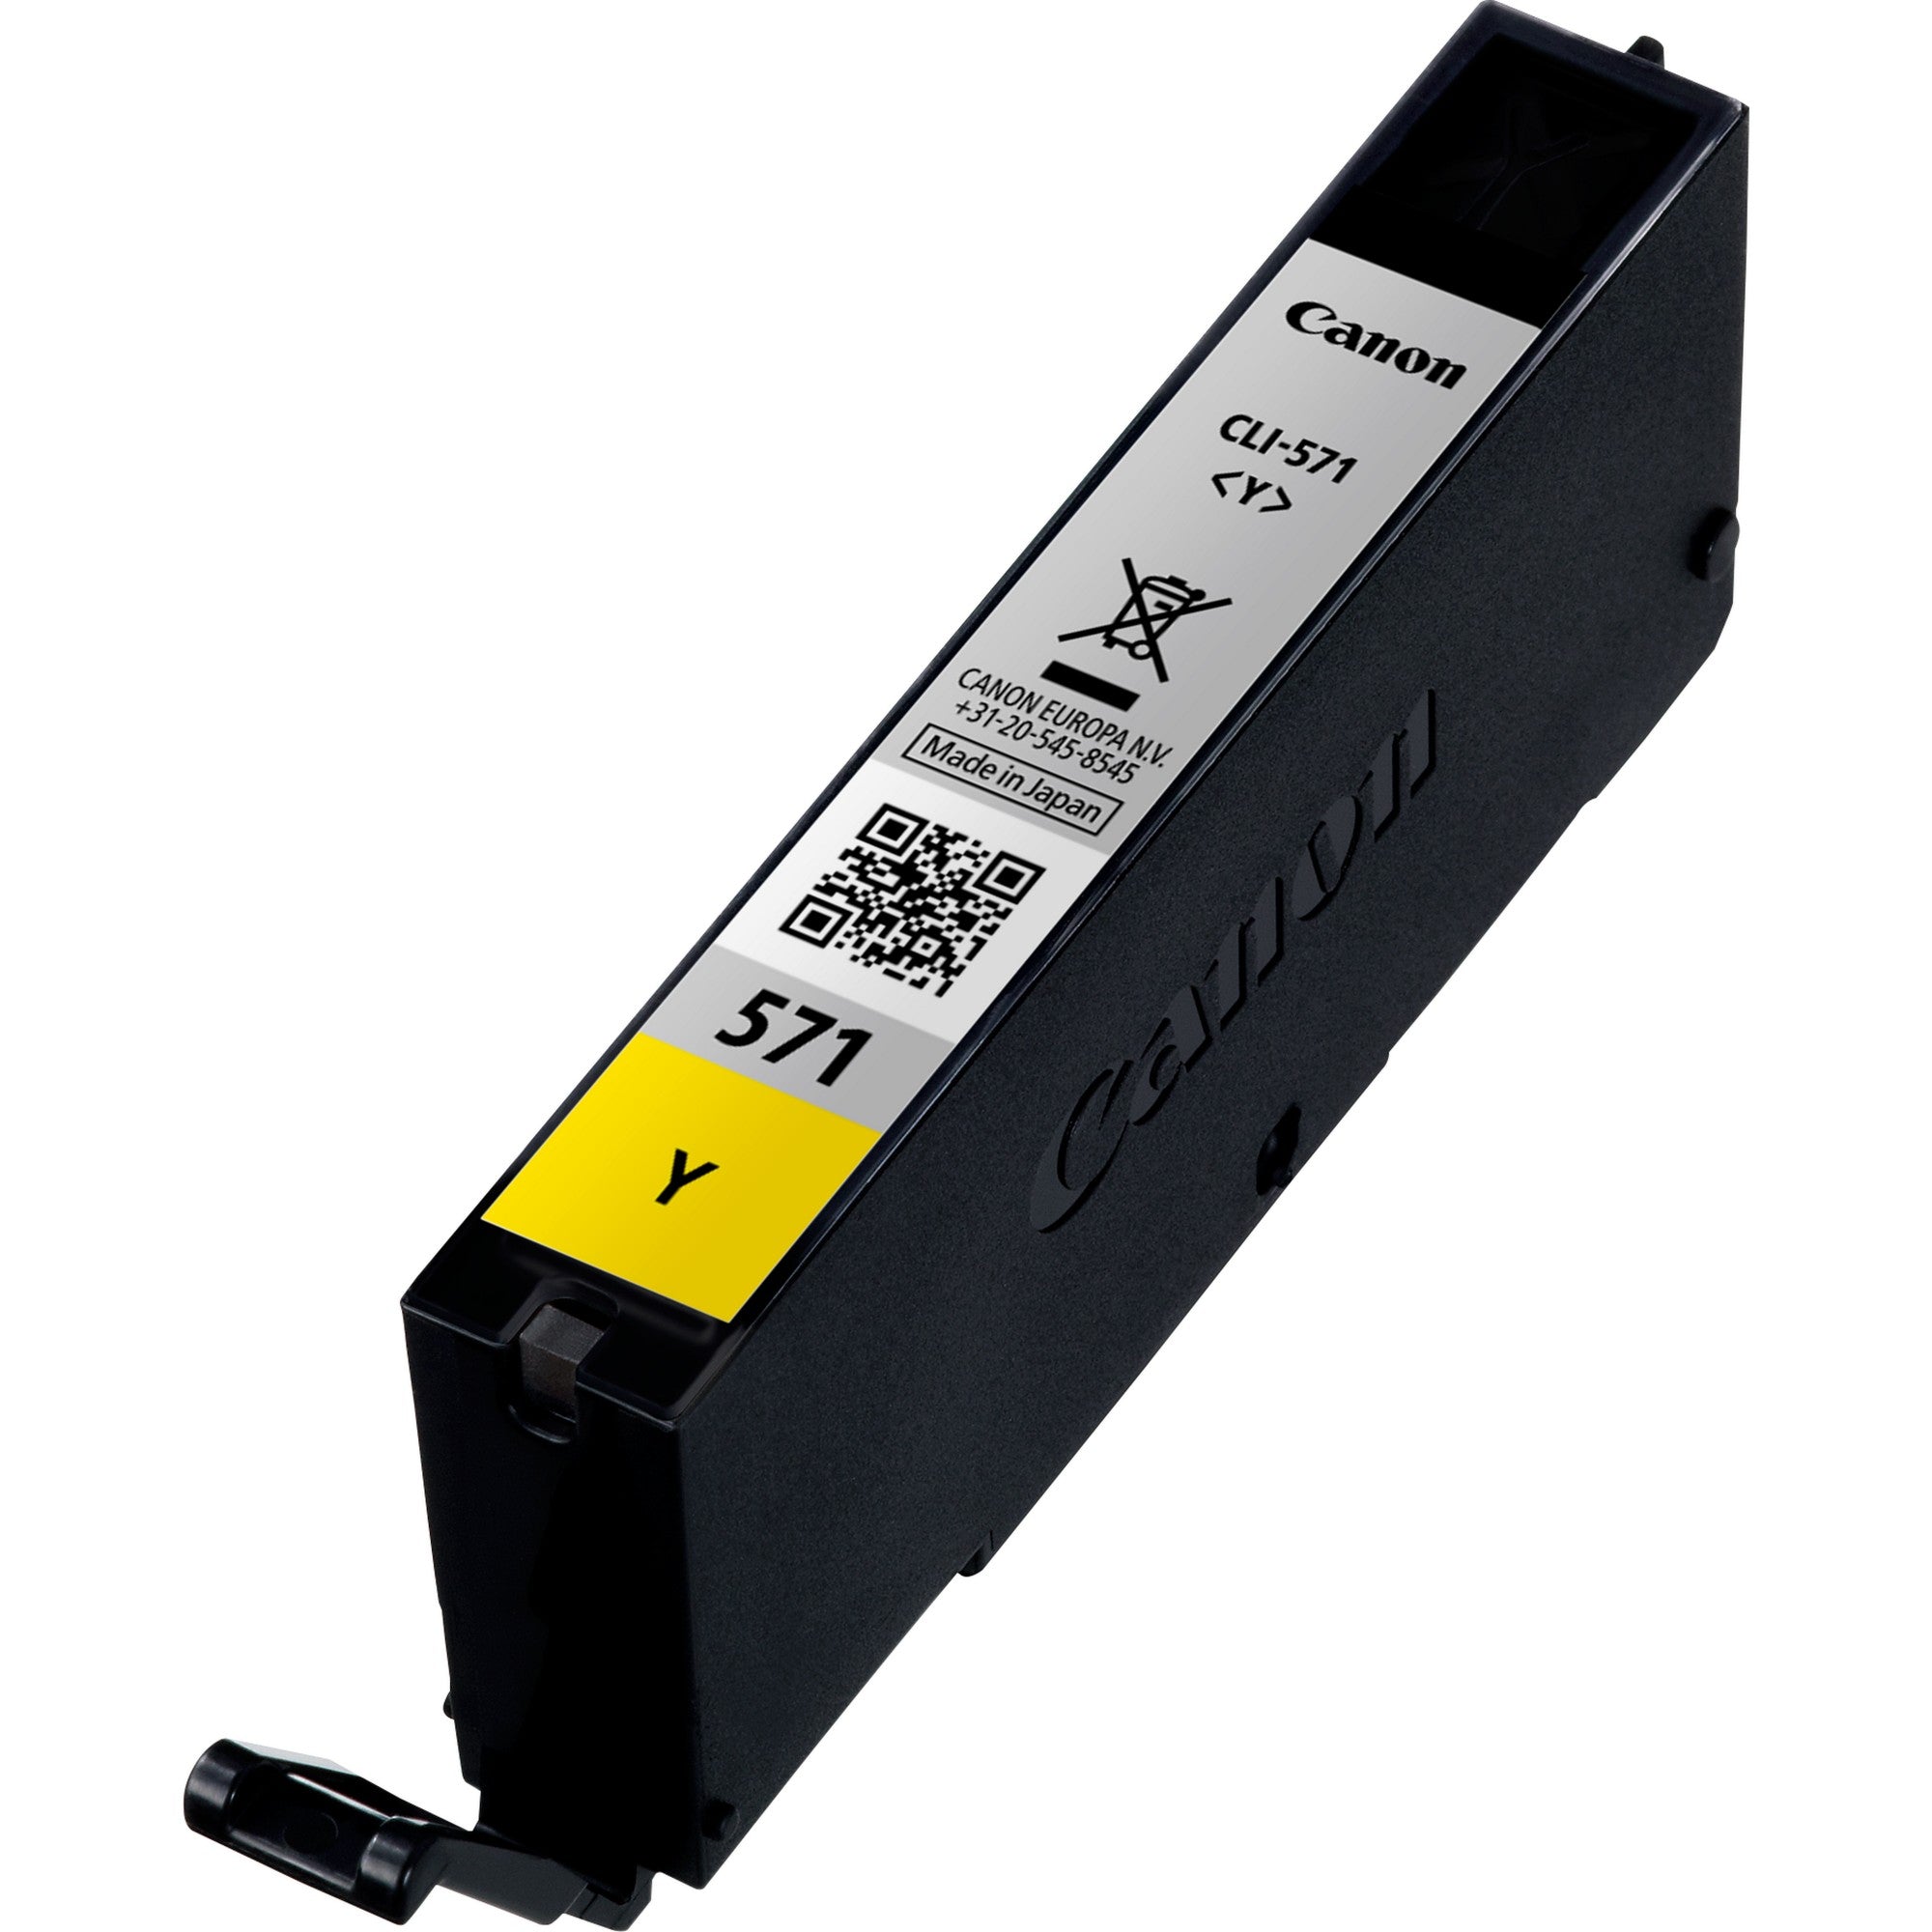 Canon 0388C001/CLI-571Y Ink cartridge yellow, 323 pages ISO/IEC 24711 161 Photos 6.5ml for Canon Pixma MG 5750/7750